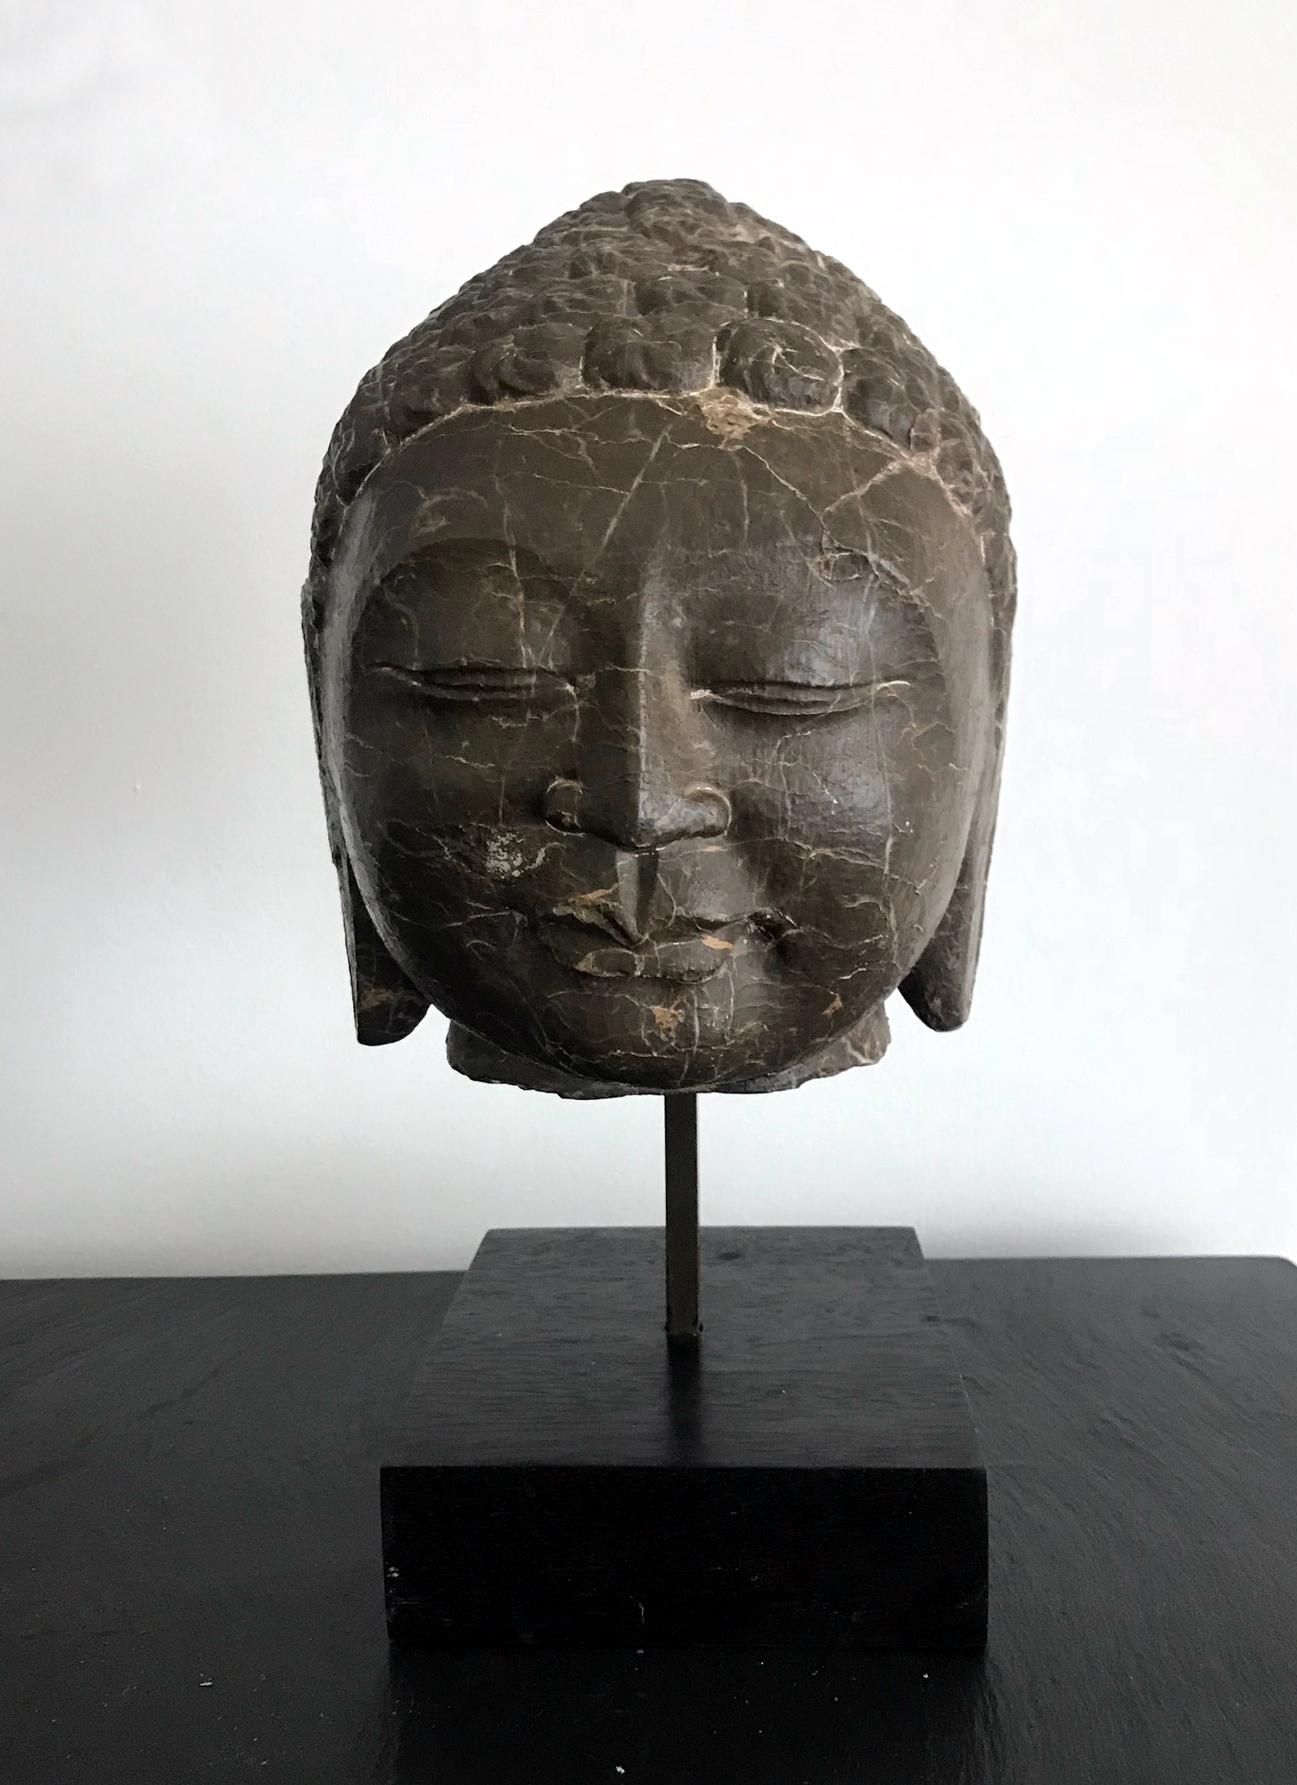 Carved out of a heavy block of dark brown marble with striking white veins, this Buddha head represents the Northern Qi style in China (550-577), but we believe that it was likely carved in the 20th century as a study for classic Buddhism sculpture.